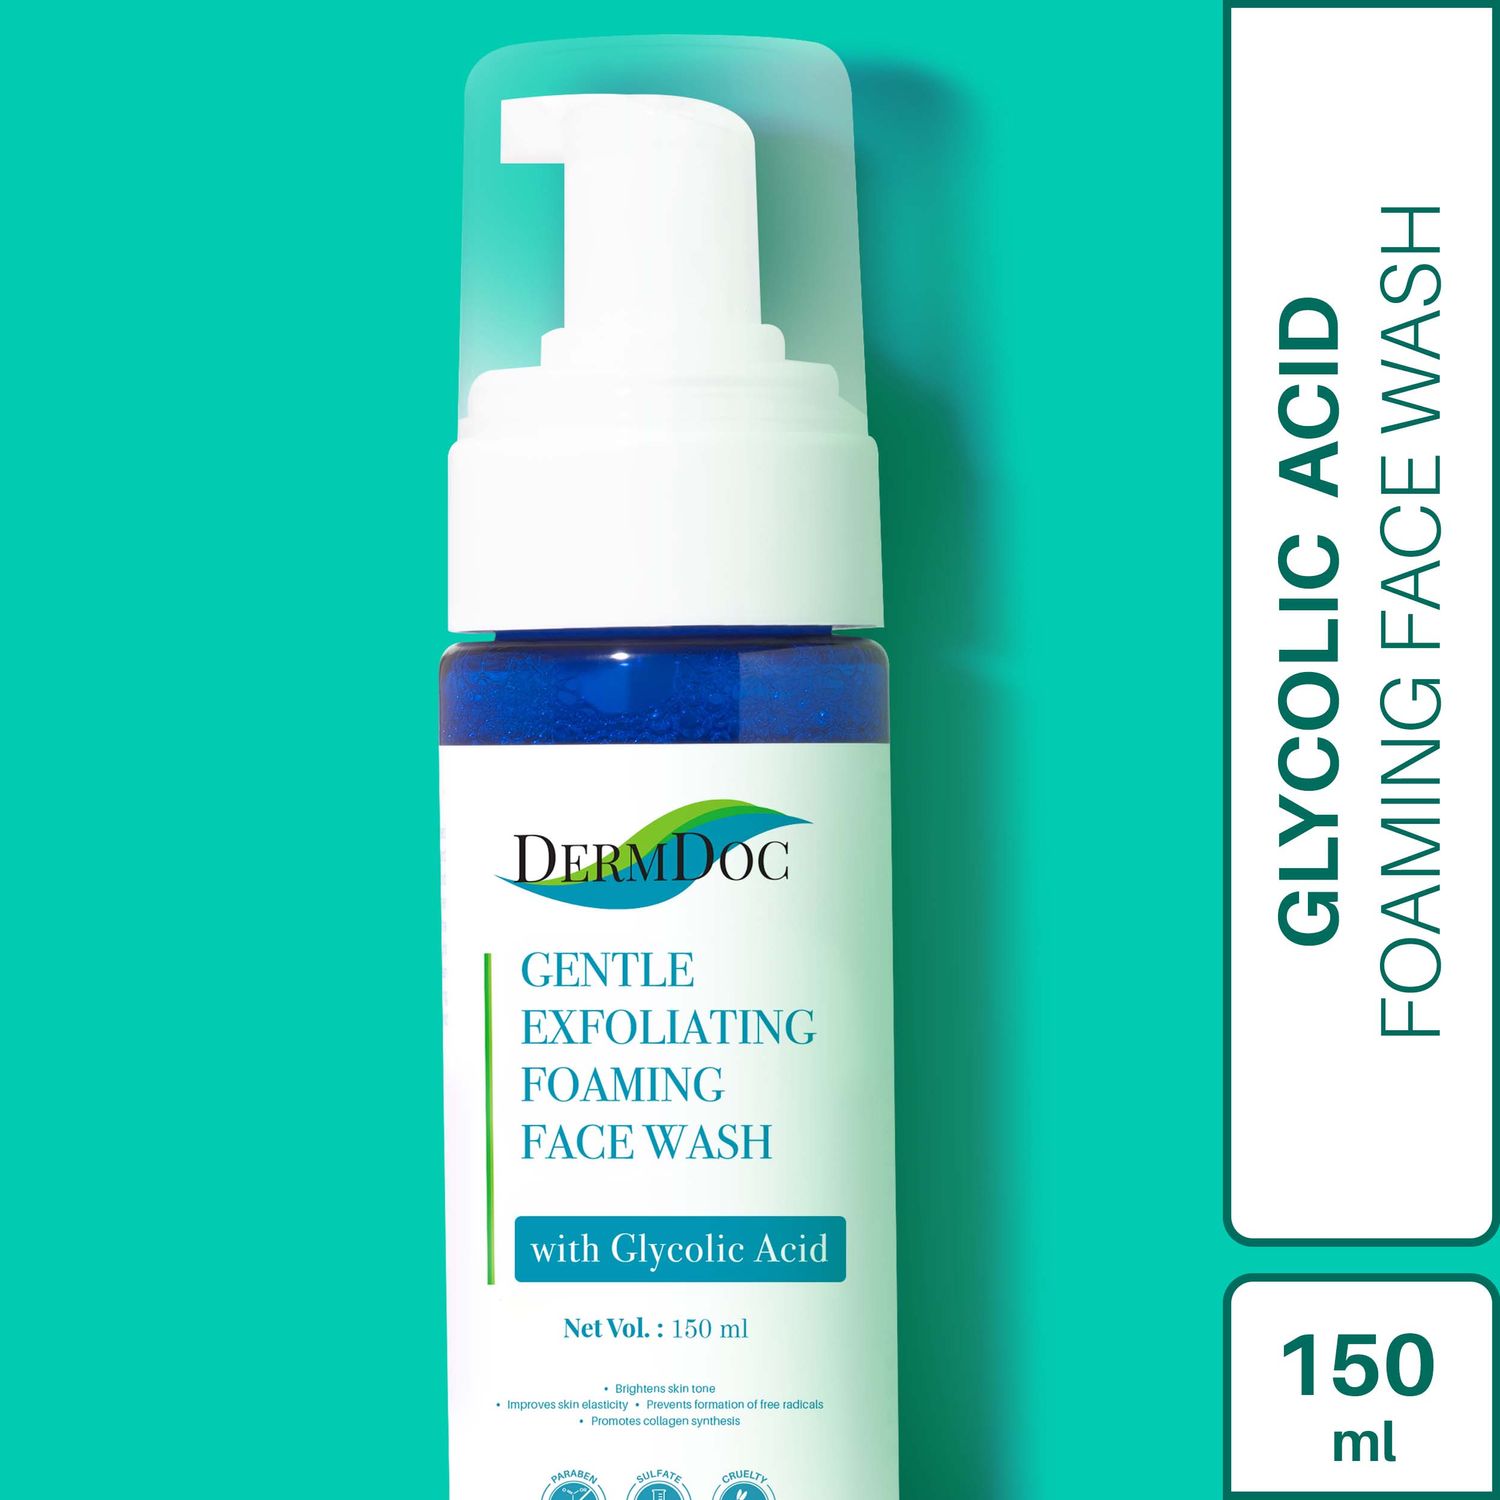 Buy DermDoc Gentle Exfoliating Foaming Face Wash with Glycolic Acid (150ml) - Purplle